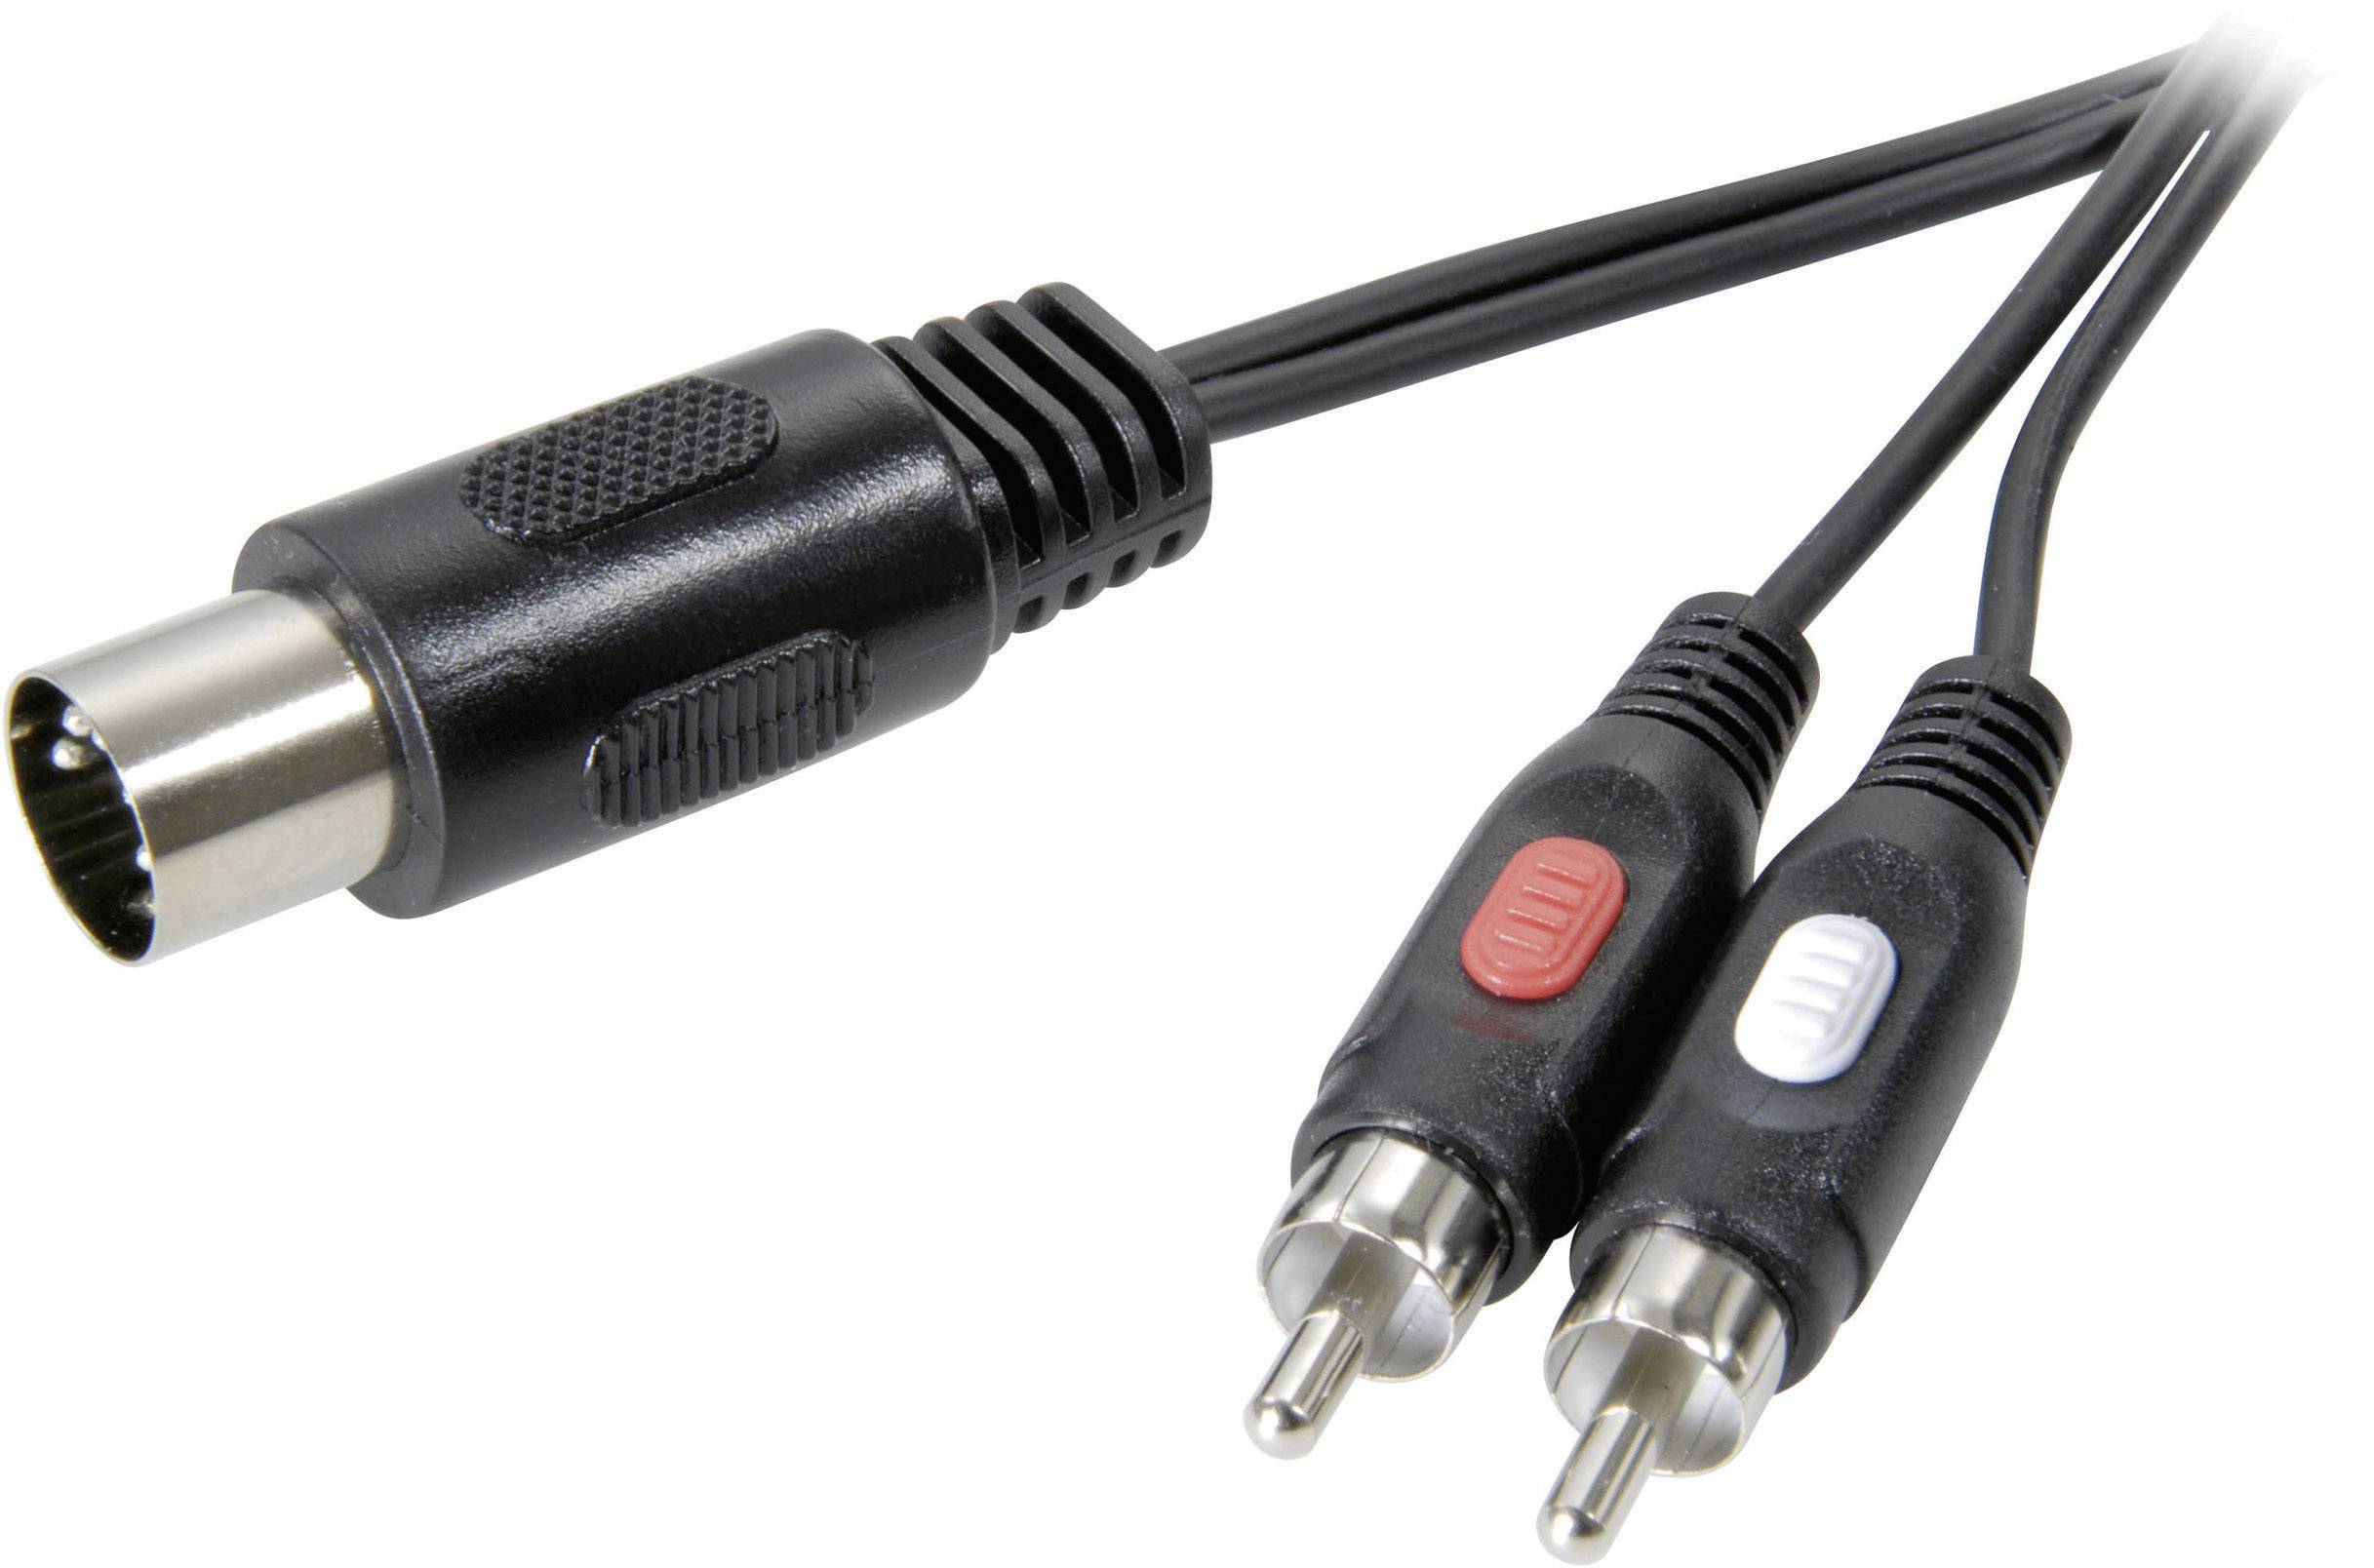 1.5 din. Din 5pin female 2 RCA. Din 5 Pin 5/180° "мама" - 2 x RCA. Phono out din-5. Фонокорректор под din5.